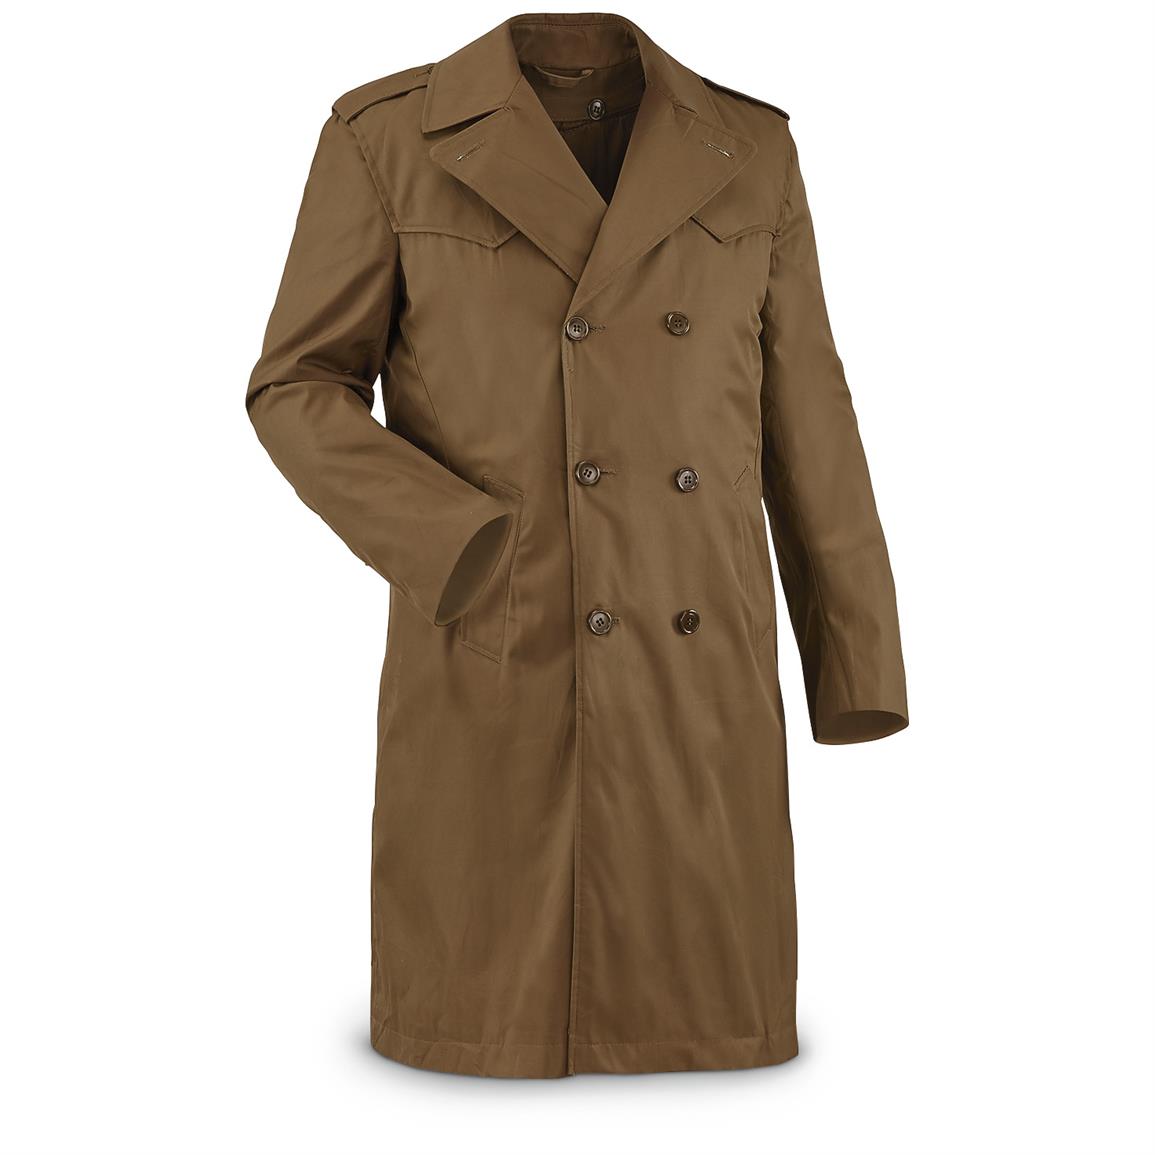 Italian Military Surplus Trench Coat, Used - 230029, Military Trench Coats at Sportsman's Guide